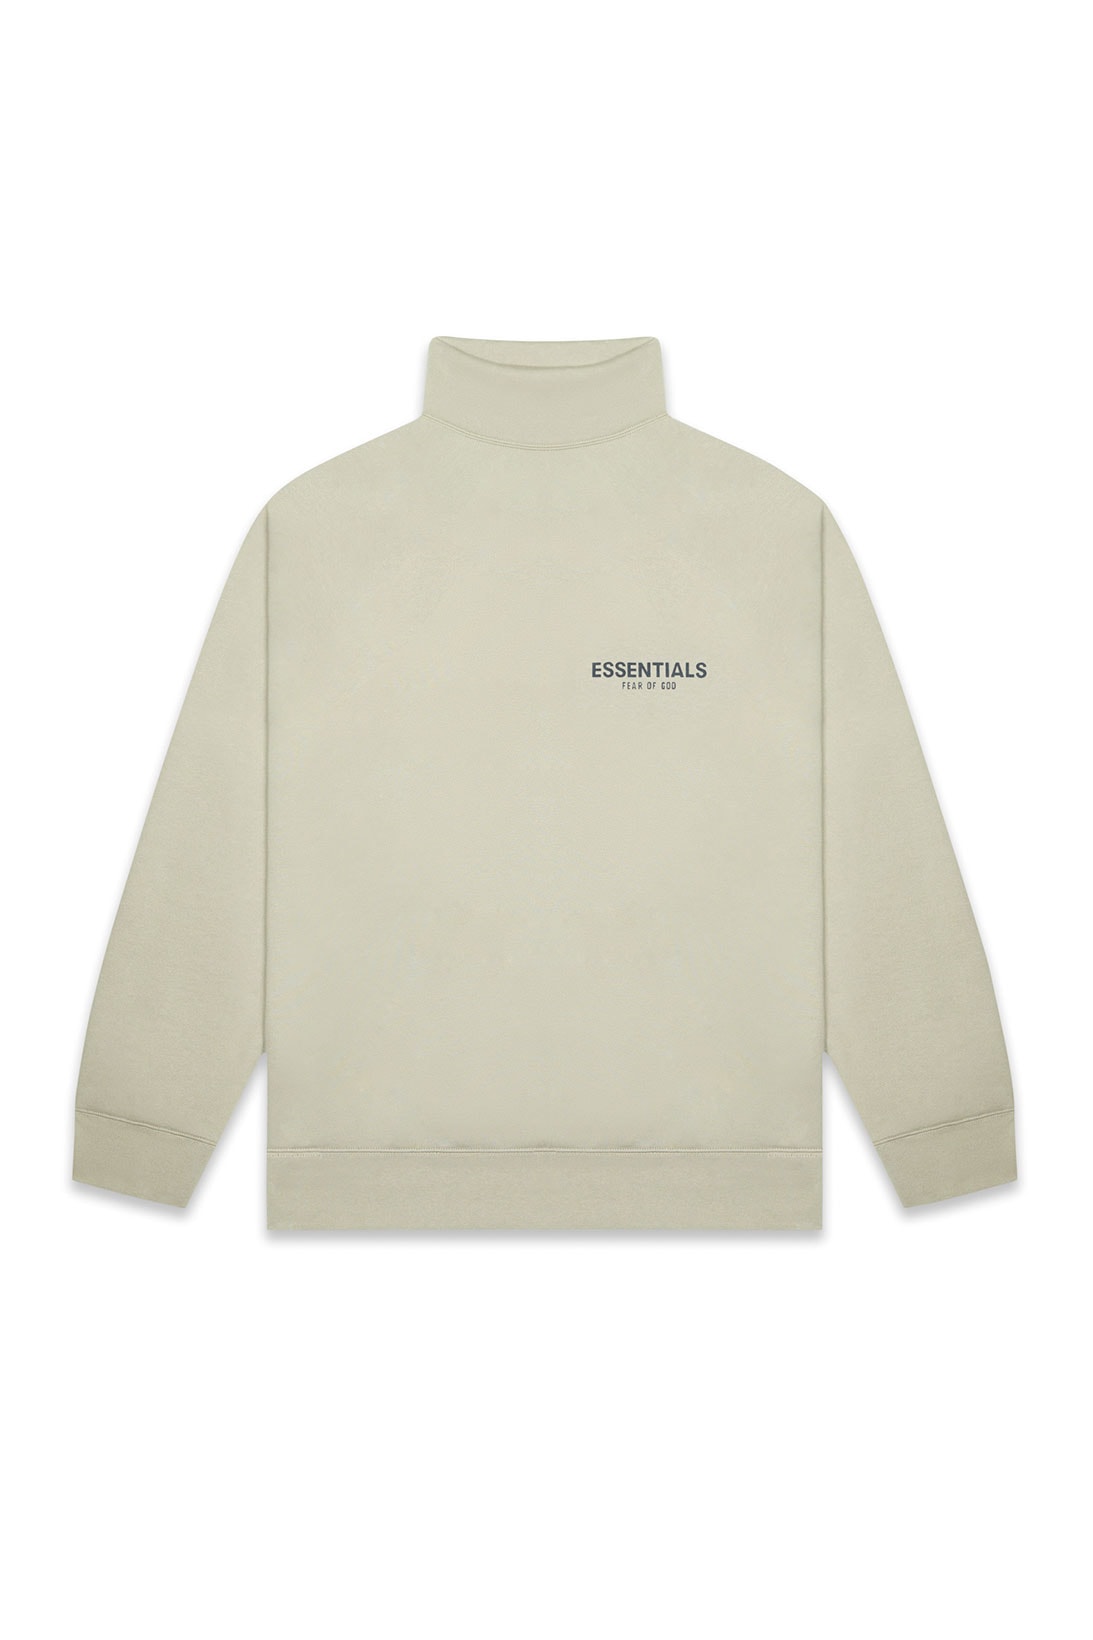 fear of god fog essentials fall winter drop 2 hoodies sweaters tracksuits release